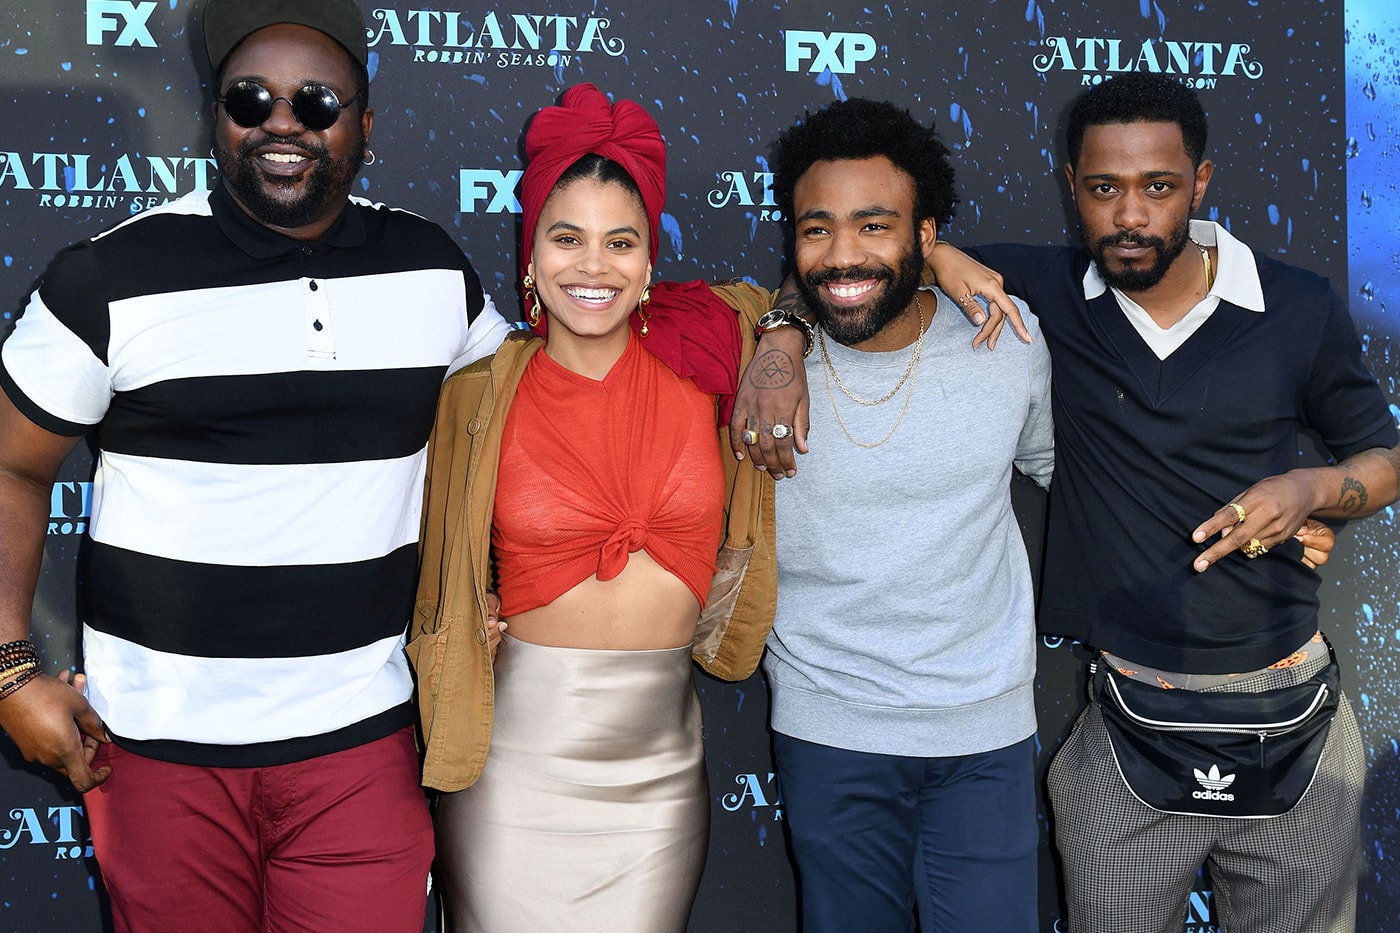 FX donald glover Atlanta Still Scheduled for Early 2022 Release premiere 